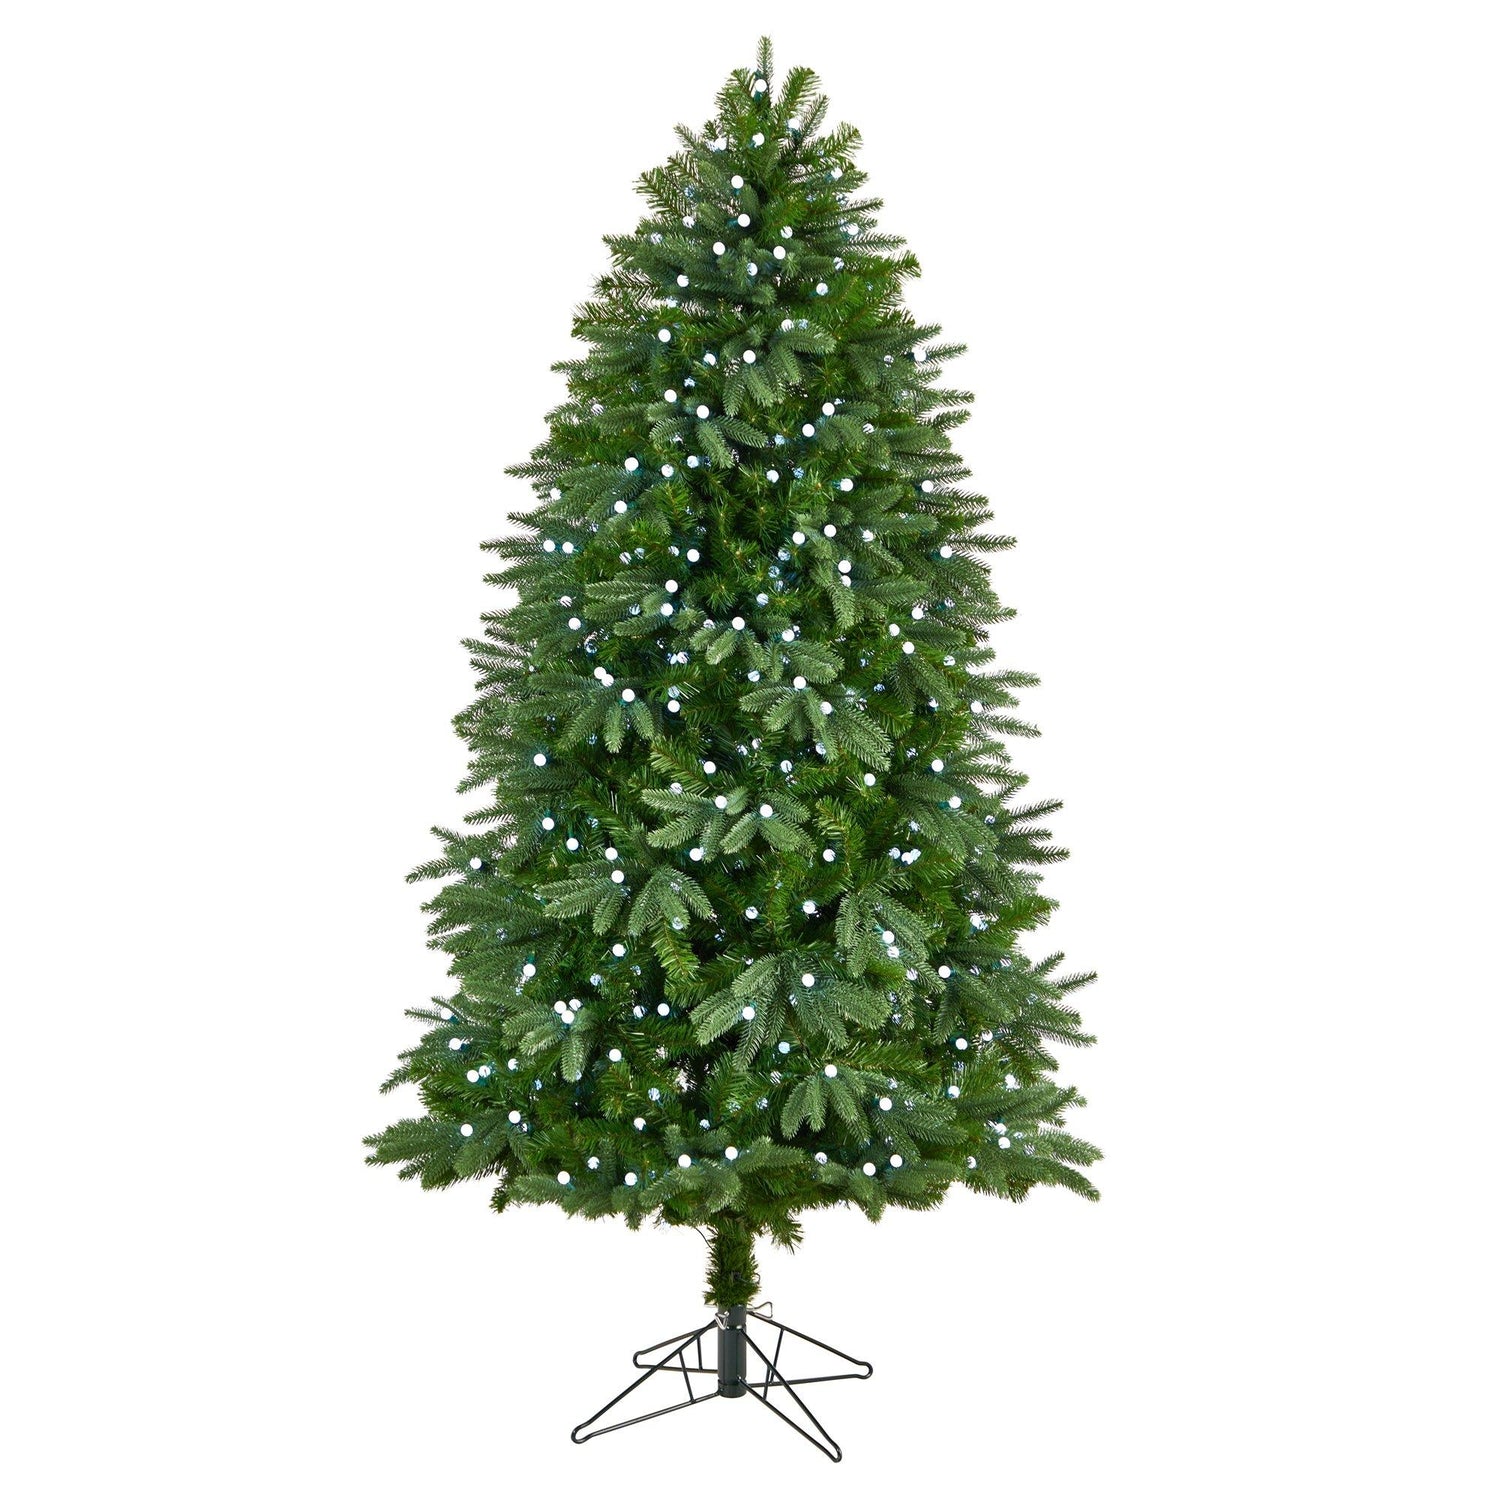 6.5’ Fraser Fir Christmas Tree with 550 Gum Ball LED Lights with Instant Connect Technology and 965 Branches